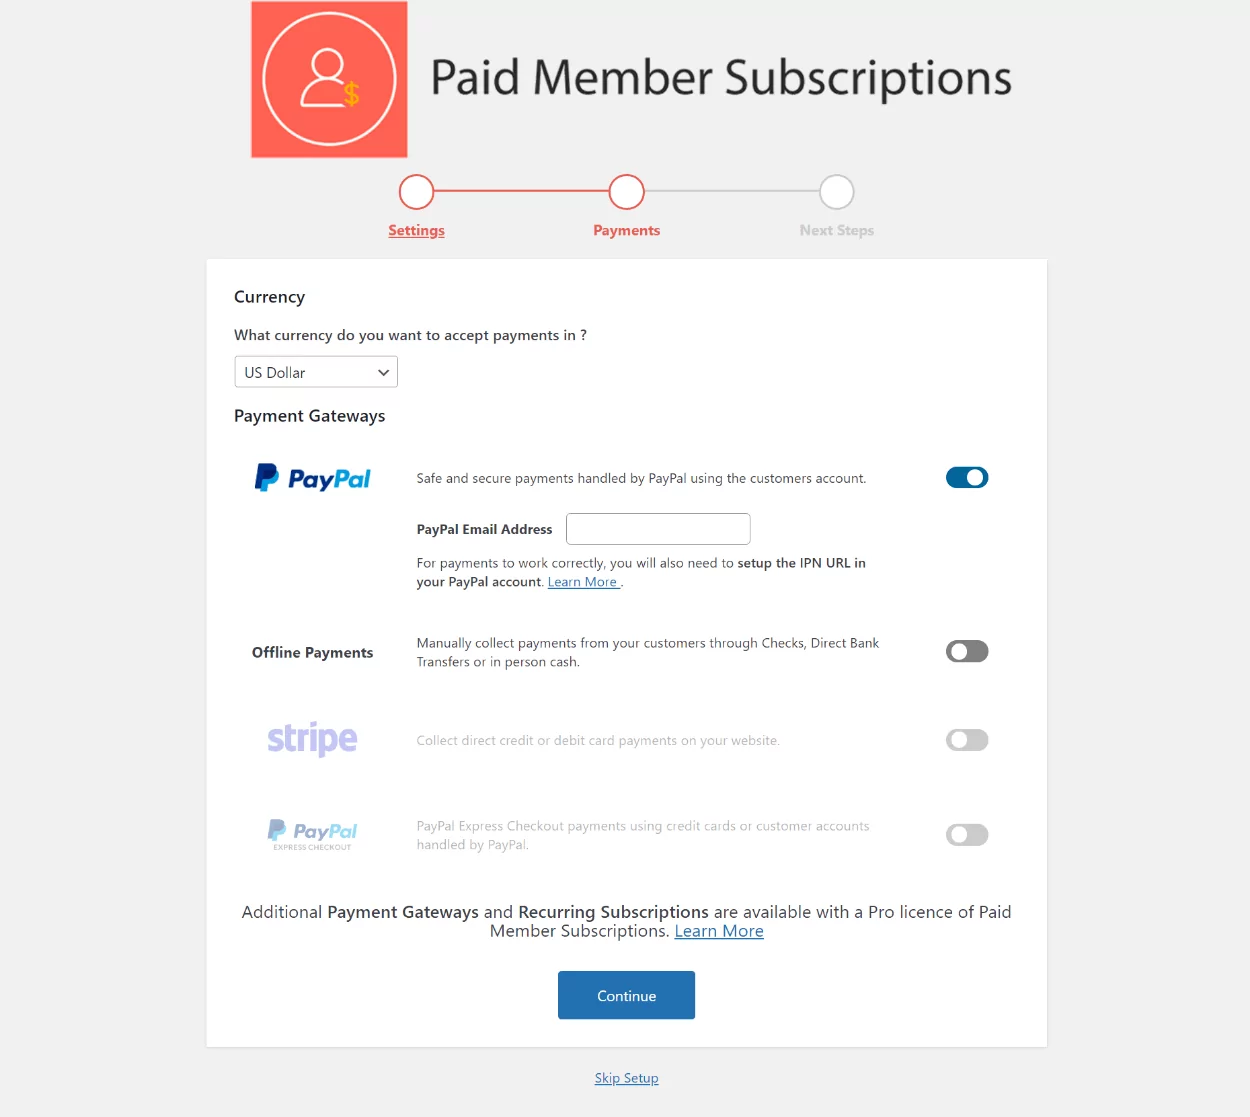 Paid Member Subscriptions payment gateways